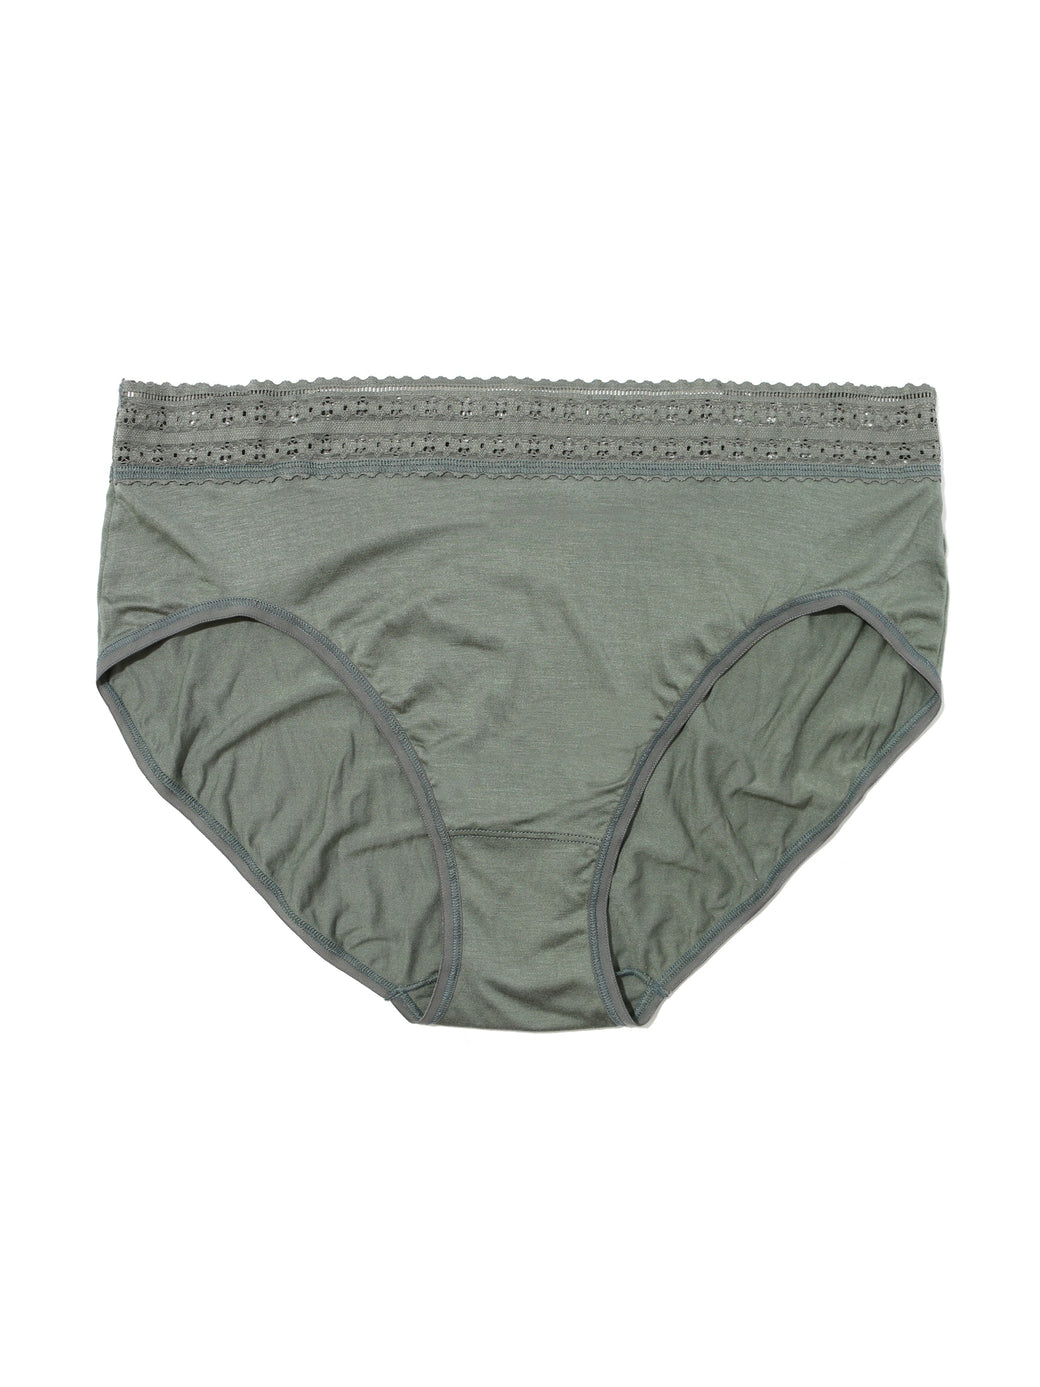 Plus Size DreamEase™ French Brief Spaced Out Grey